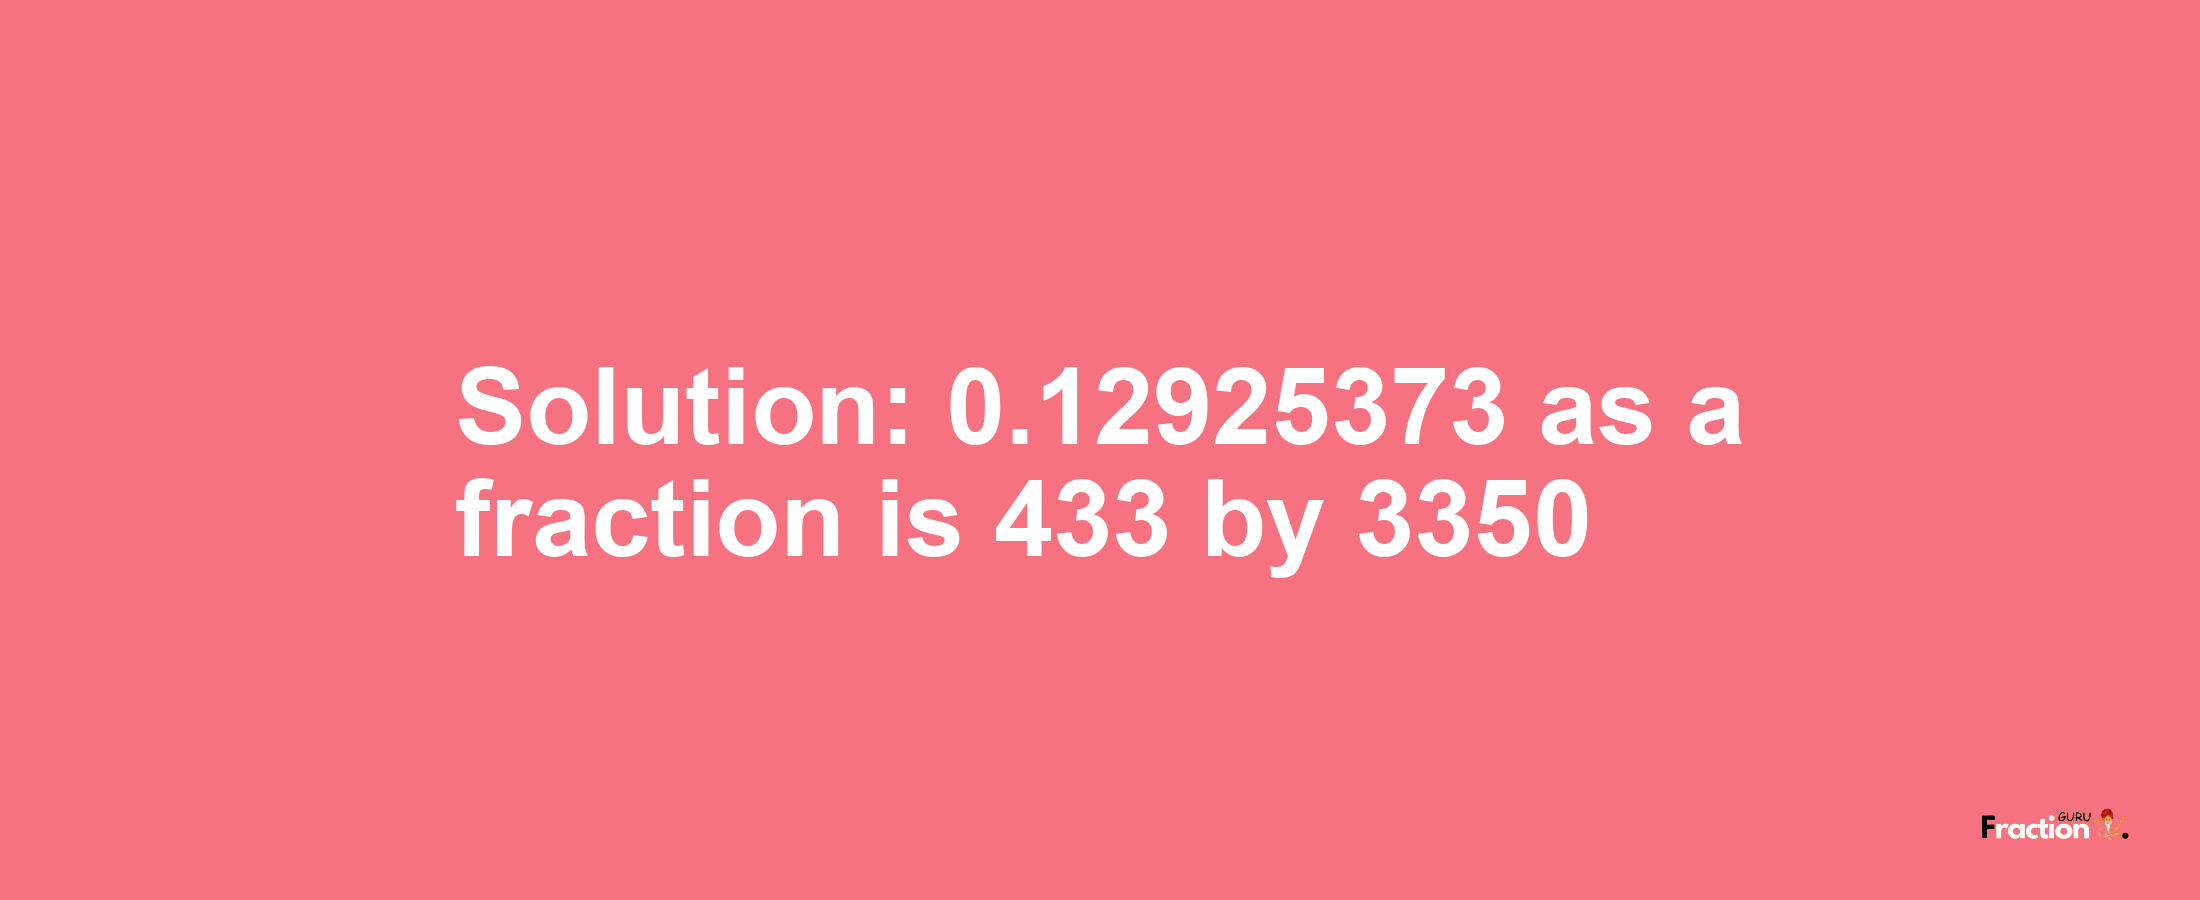 Solution:0.12925373 as a fraction is 433/3350